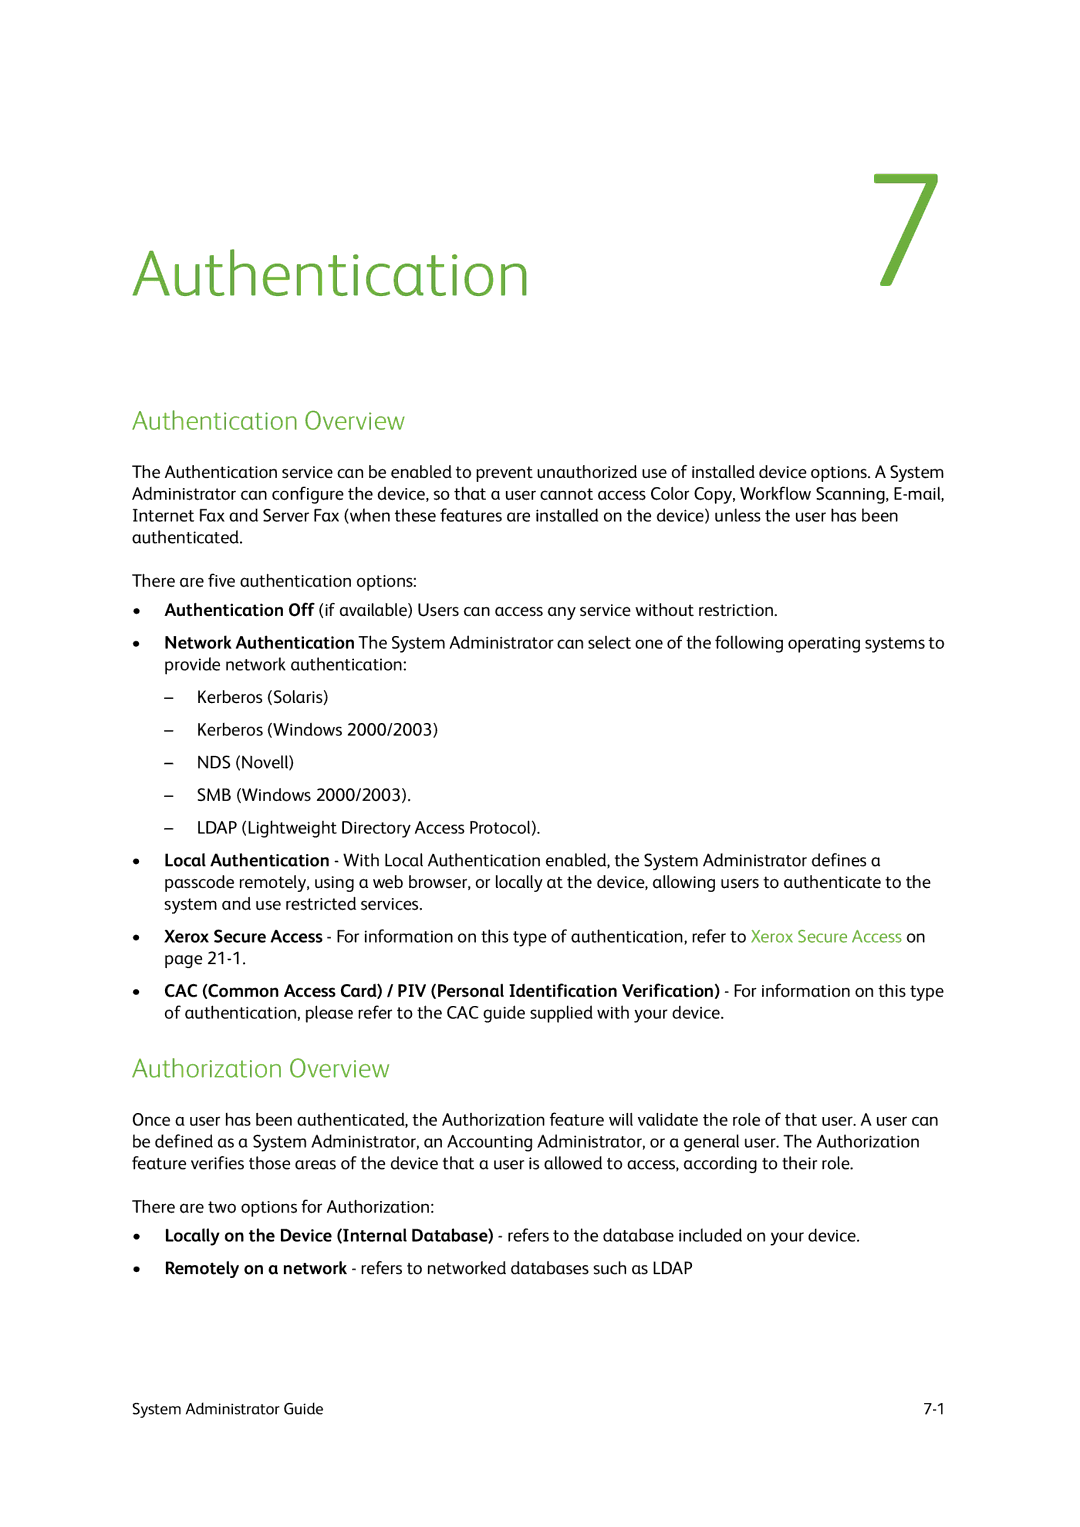 Xerox 9203, 9202, 9201 manual Authentication7, Authentication Overview, Authorization Overview 